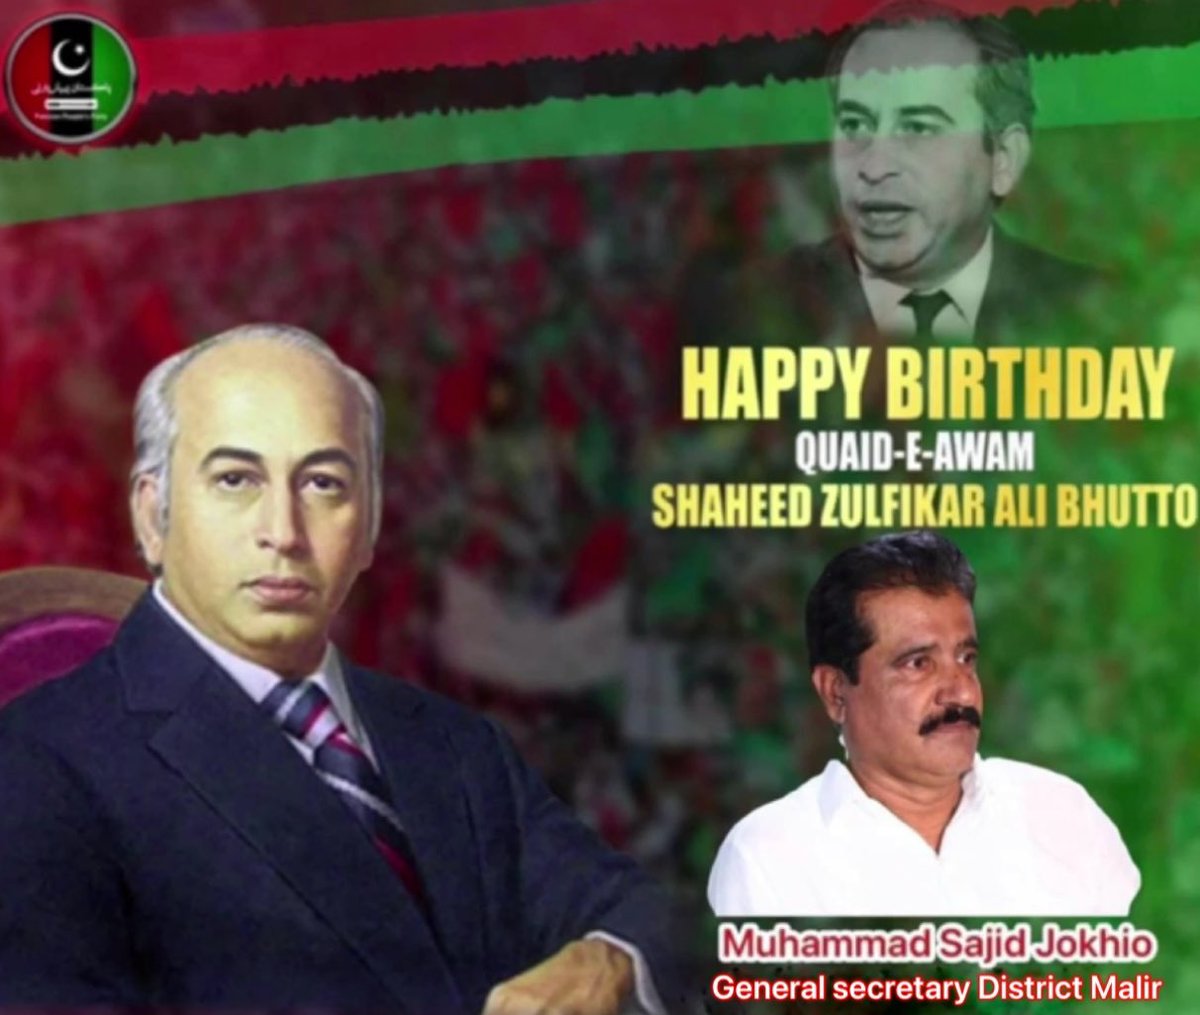 Happy birth anniversary to the visionary leader, Shaheed Zulfiqar Ali Bhutto! Your legacy continues to inspire us all. #ZAB #SZAB